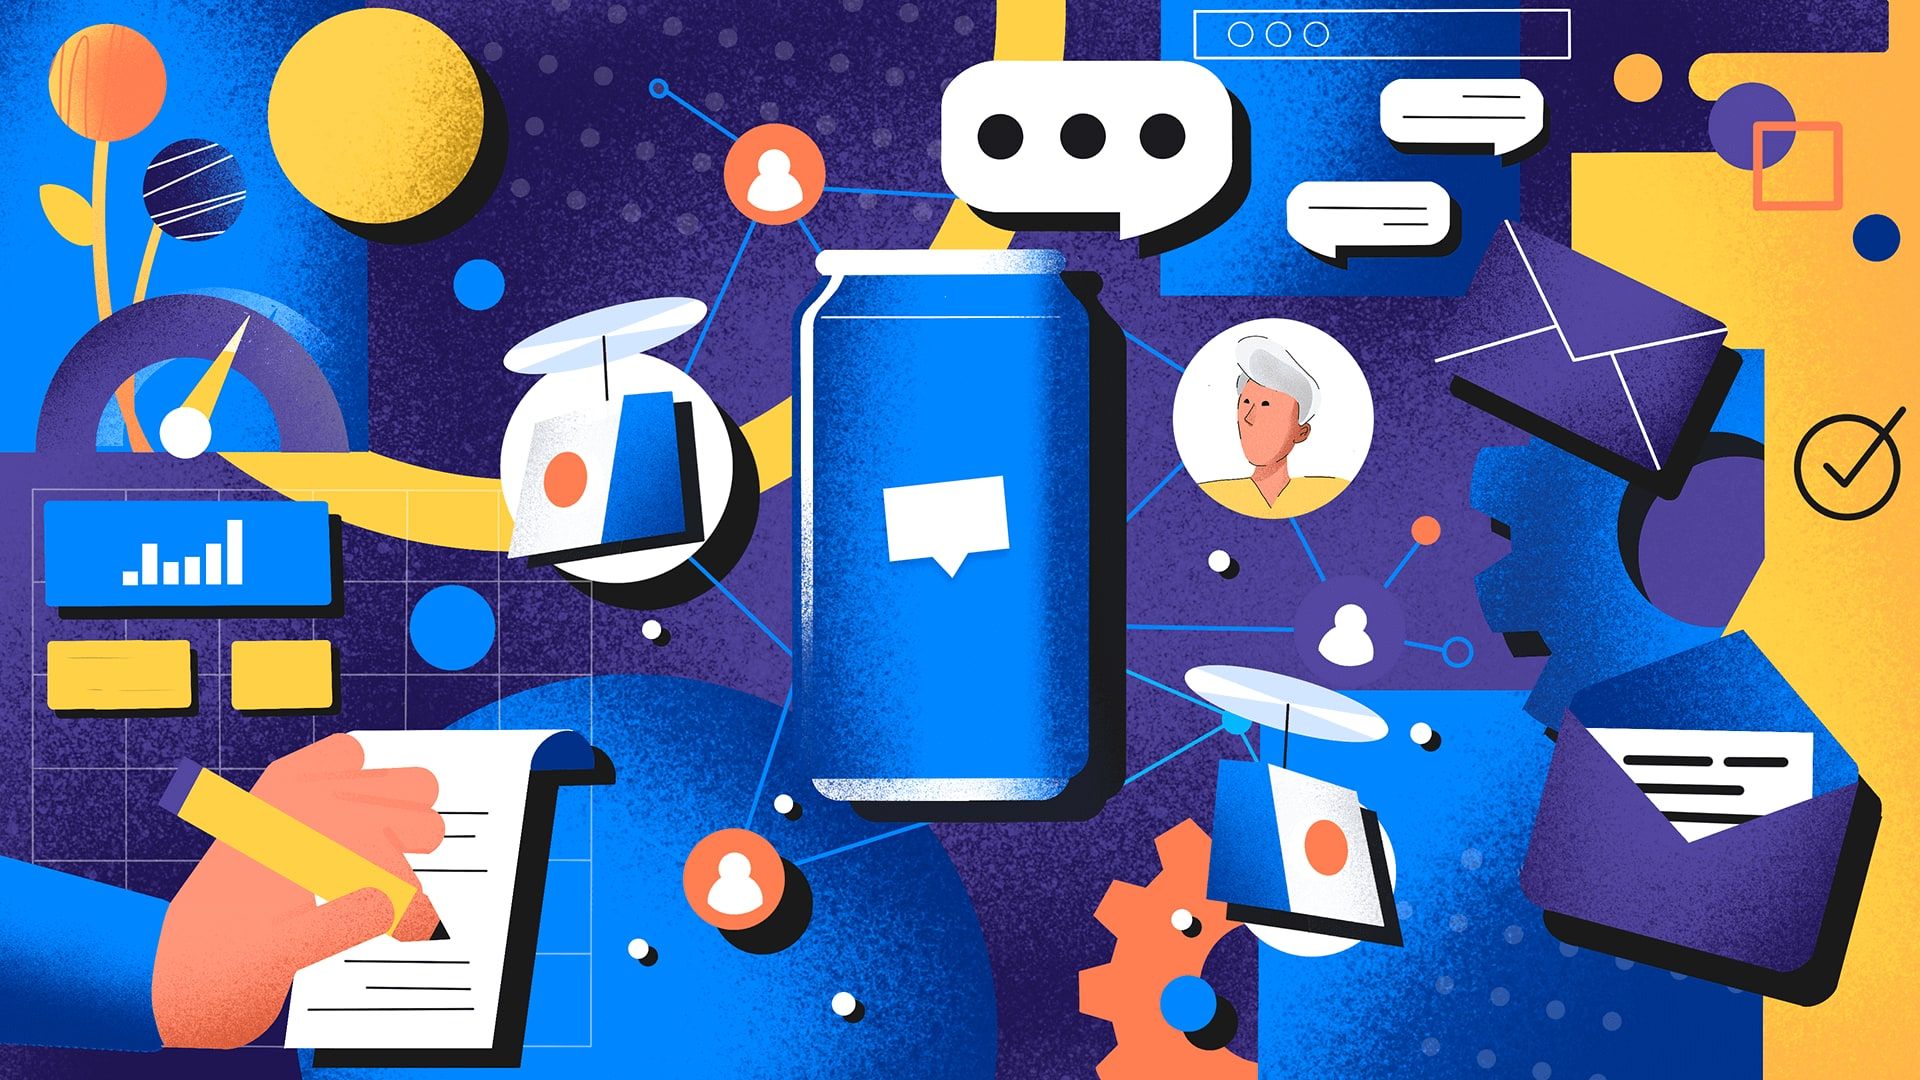 What are the benefits of canned responses for customer service?